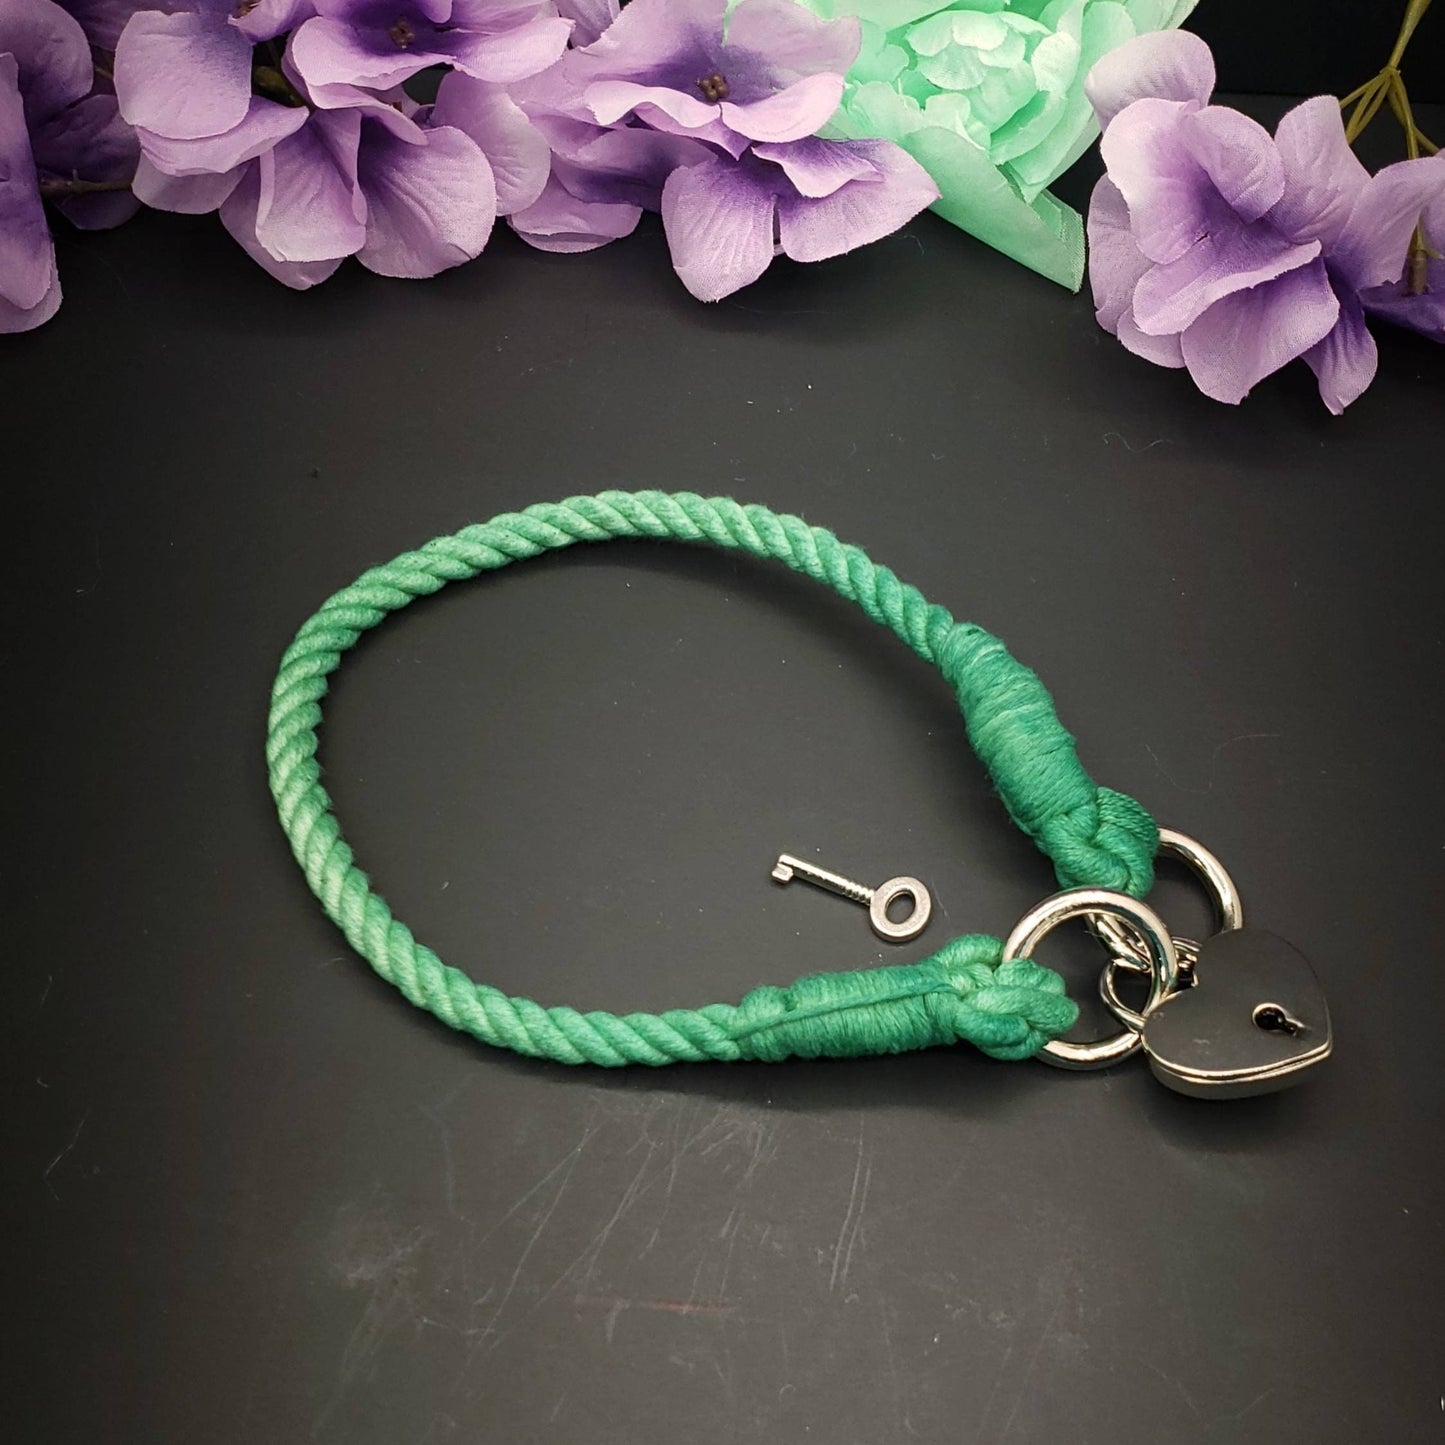 Forest Green Heart Locking Collar - BDSM Rope Choker - Submissive Cotton Collar | Novelty Choker Accessory for Roleplay